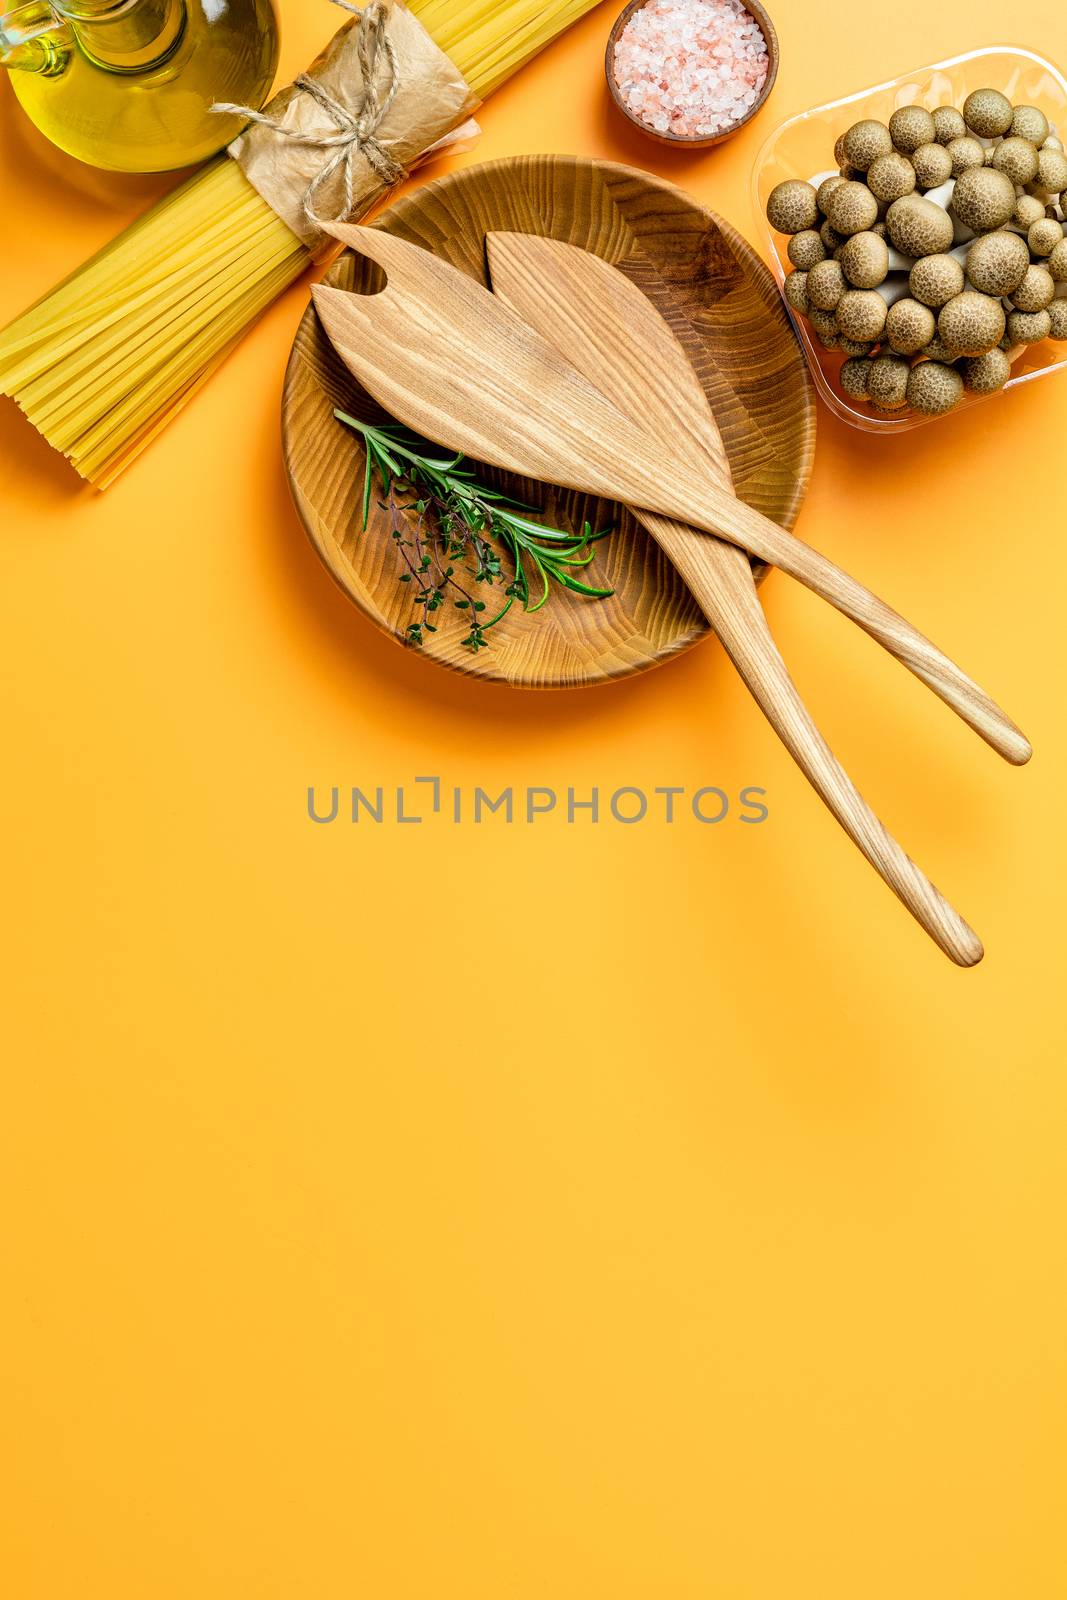 Spaghetti, shimeji mushroom, olive oil,  pink salt, empty wooden bowl, wooden spoons for salad over yellow background. Top view, flat lay, healthy food concept, copy space for you text.